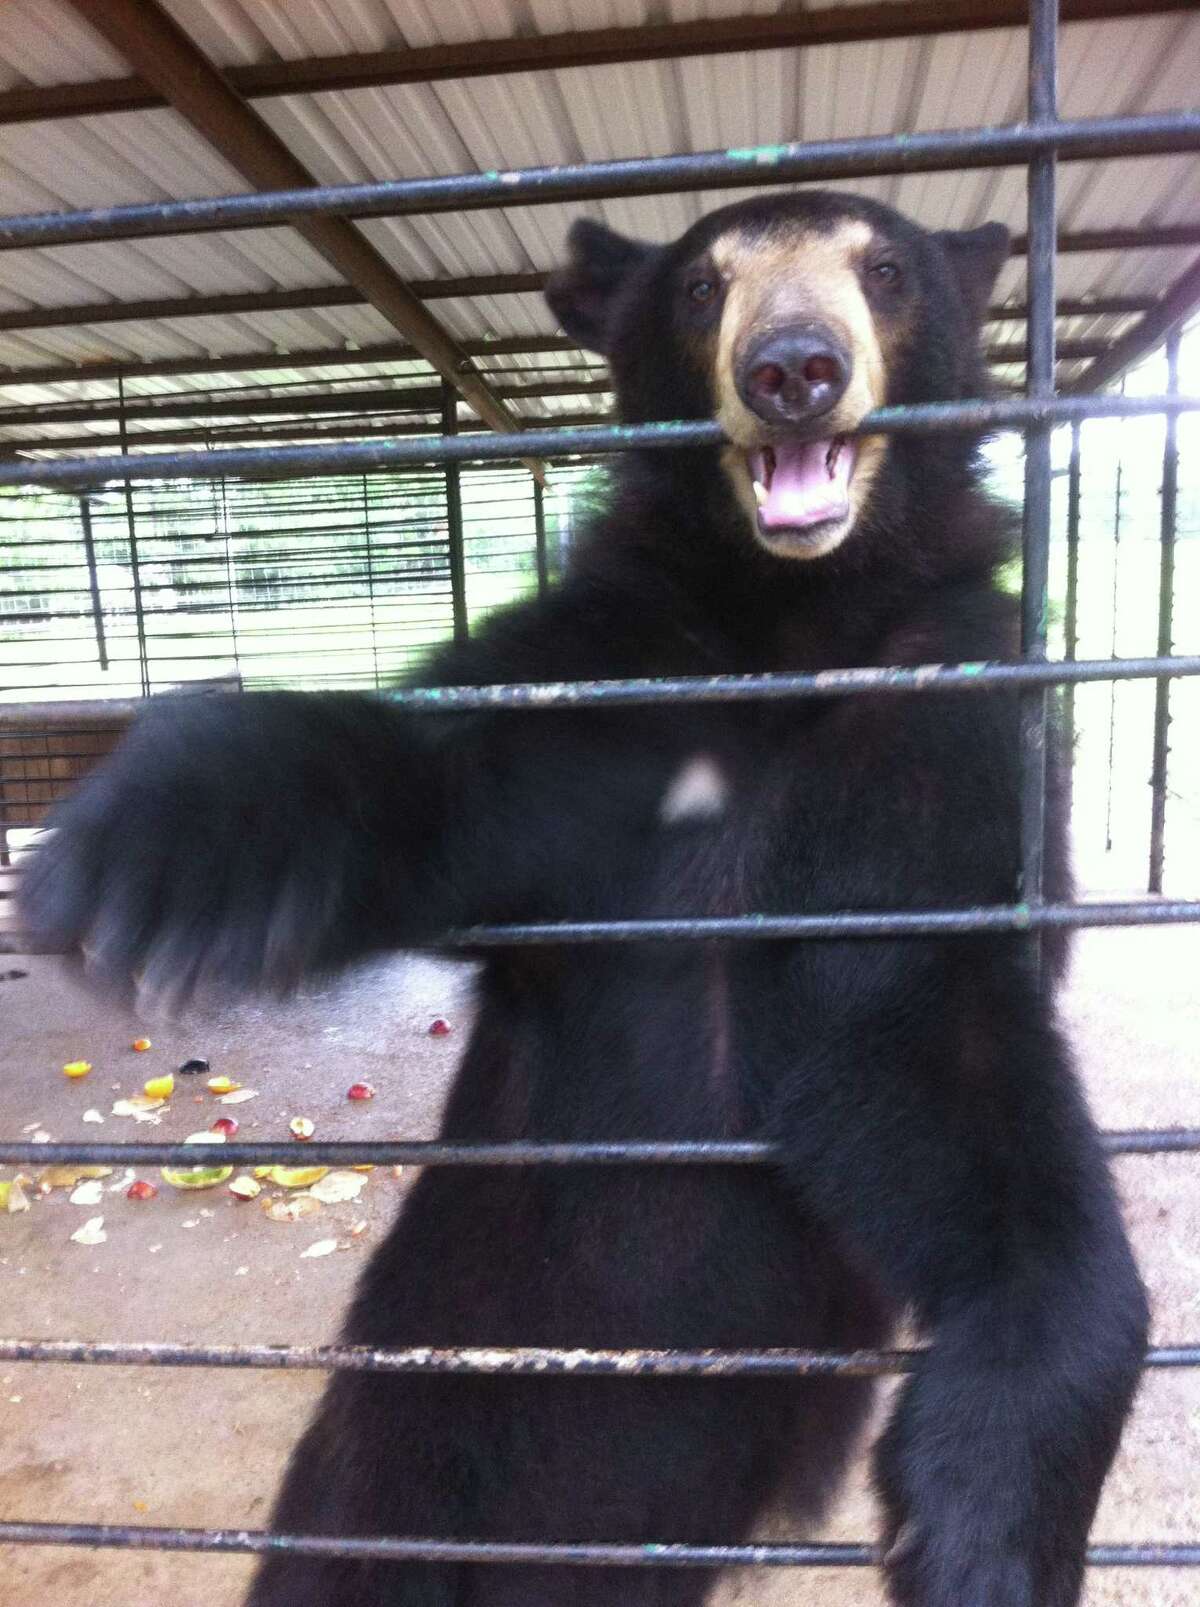 The mission of Bears, ETC is to establish a Bear and Exotic Animal Rescue Sanctuary in Montgomery County, connecting people with nature through education and awareness. Upcoming is a Bear Crawl fundraiser on May 29 and May 30 in Conroe and Montgomery. Kati Krouse of Bears Etc. is pictured caring for bears.